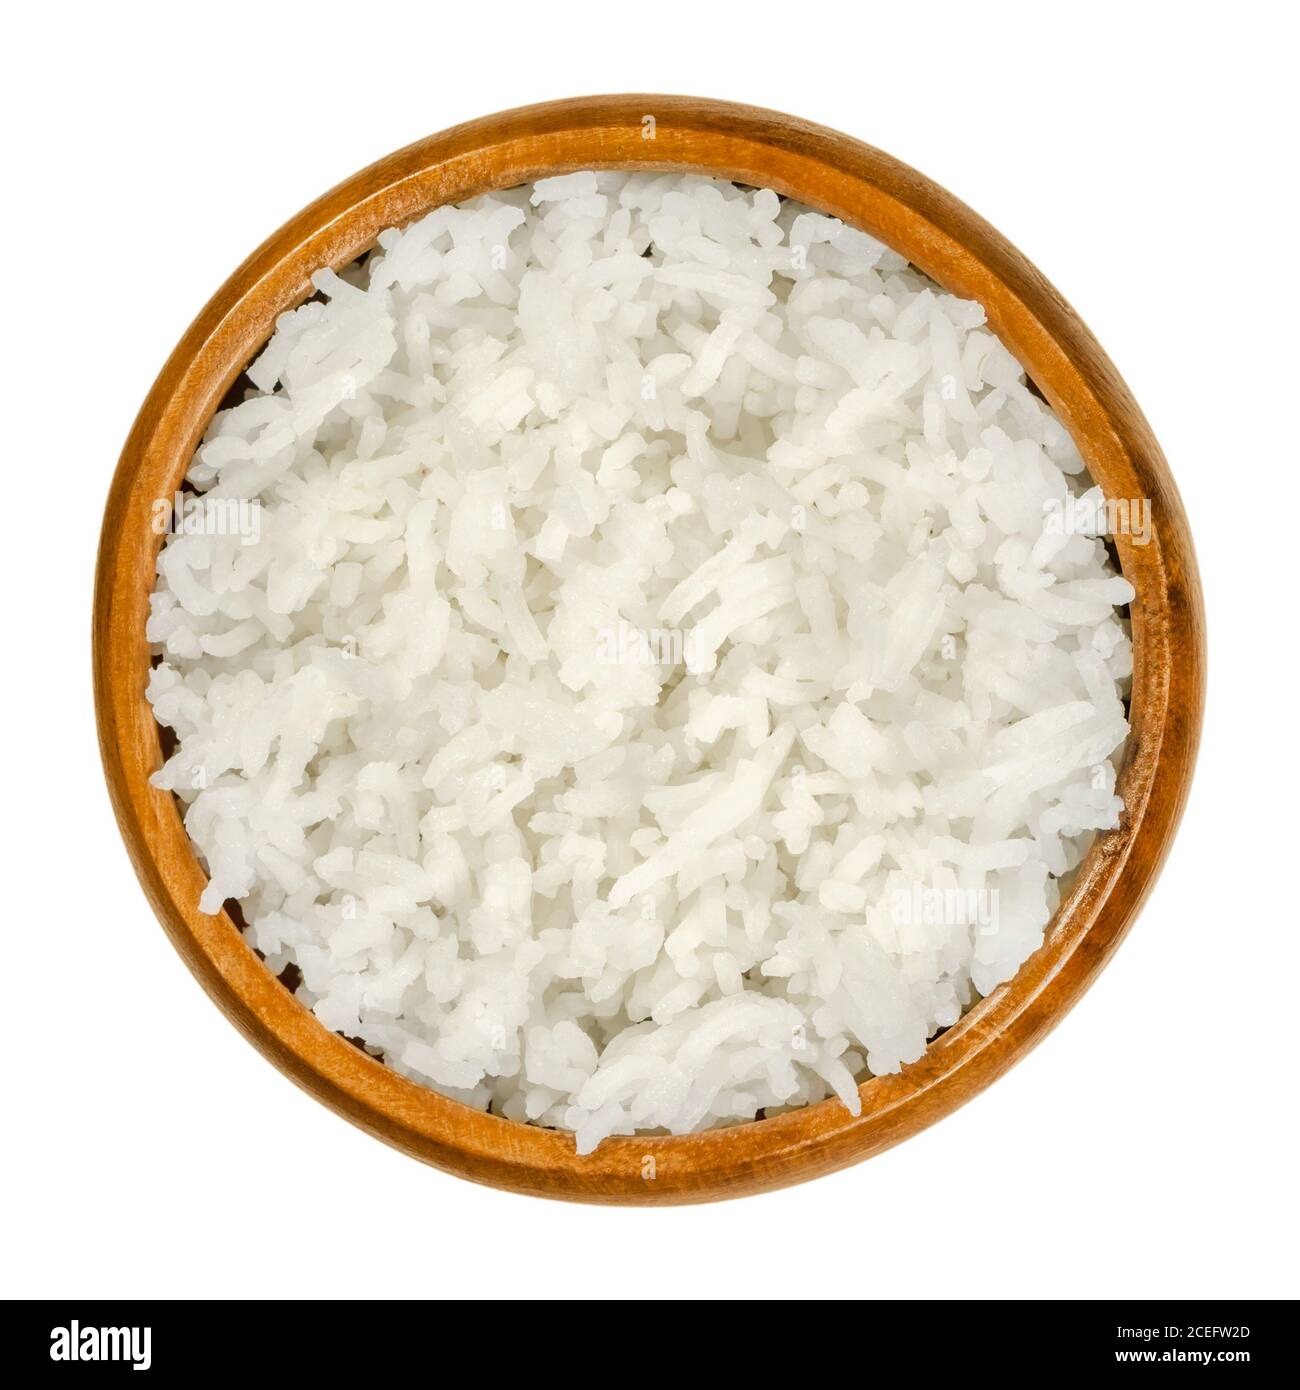 Cooked white basmati rice in a wooden bowl. Rice variety with long slender grains and aromatic smell and taste, from the Indian subcontinent. Stock Photo